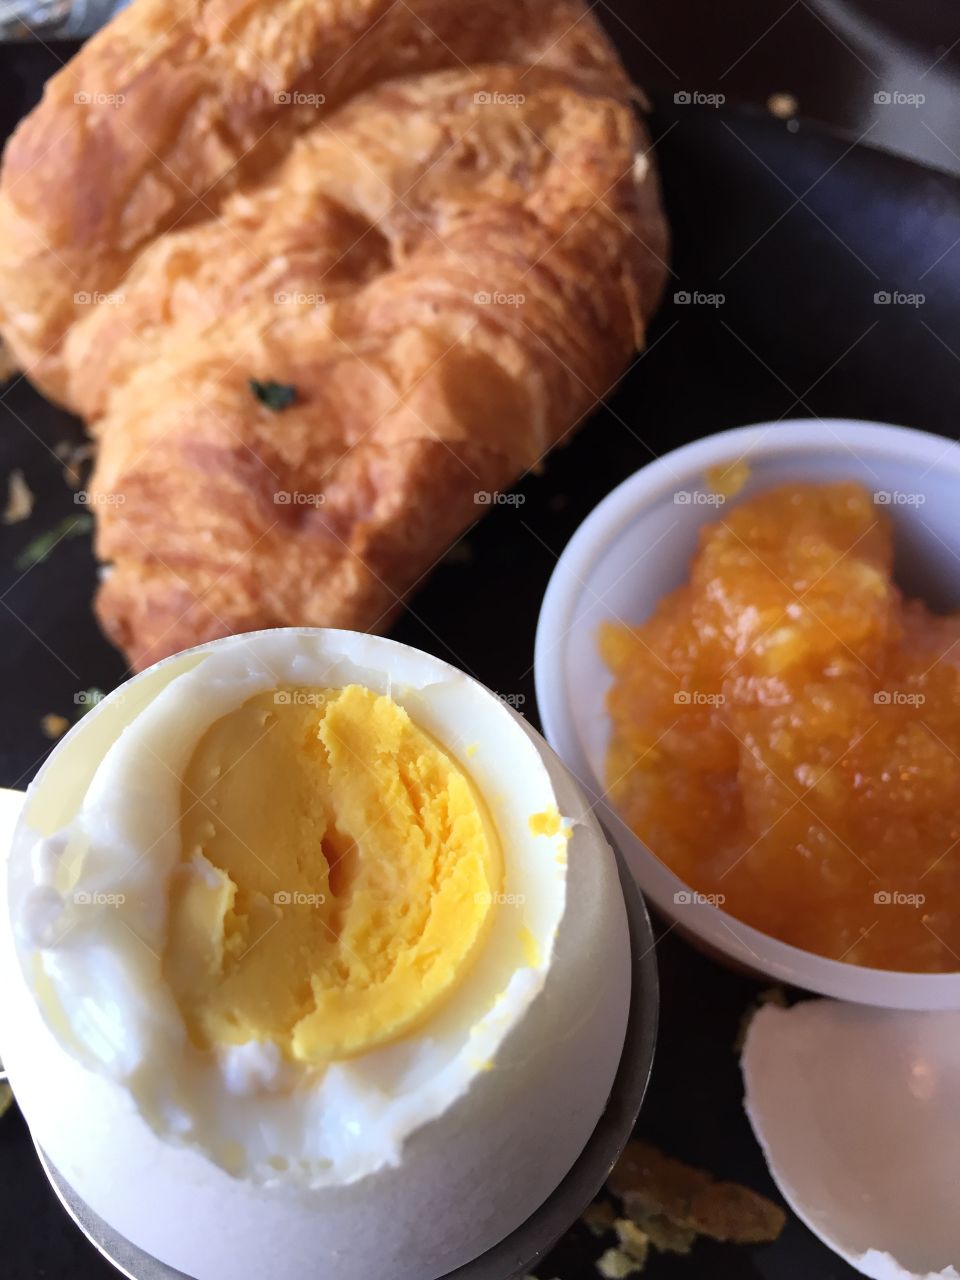 Fresh buttery, flaky croissant, fresh made satsuma marmalade and an organic egg from a free-range organic chicken - my kind of breakfast!